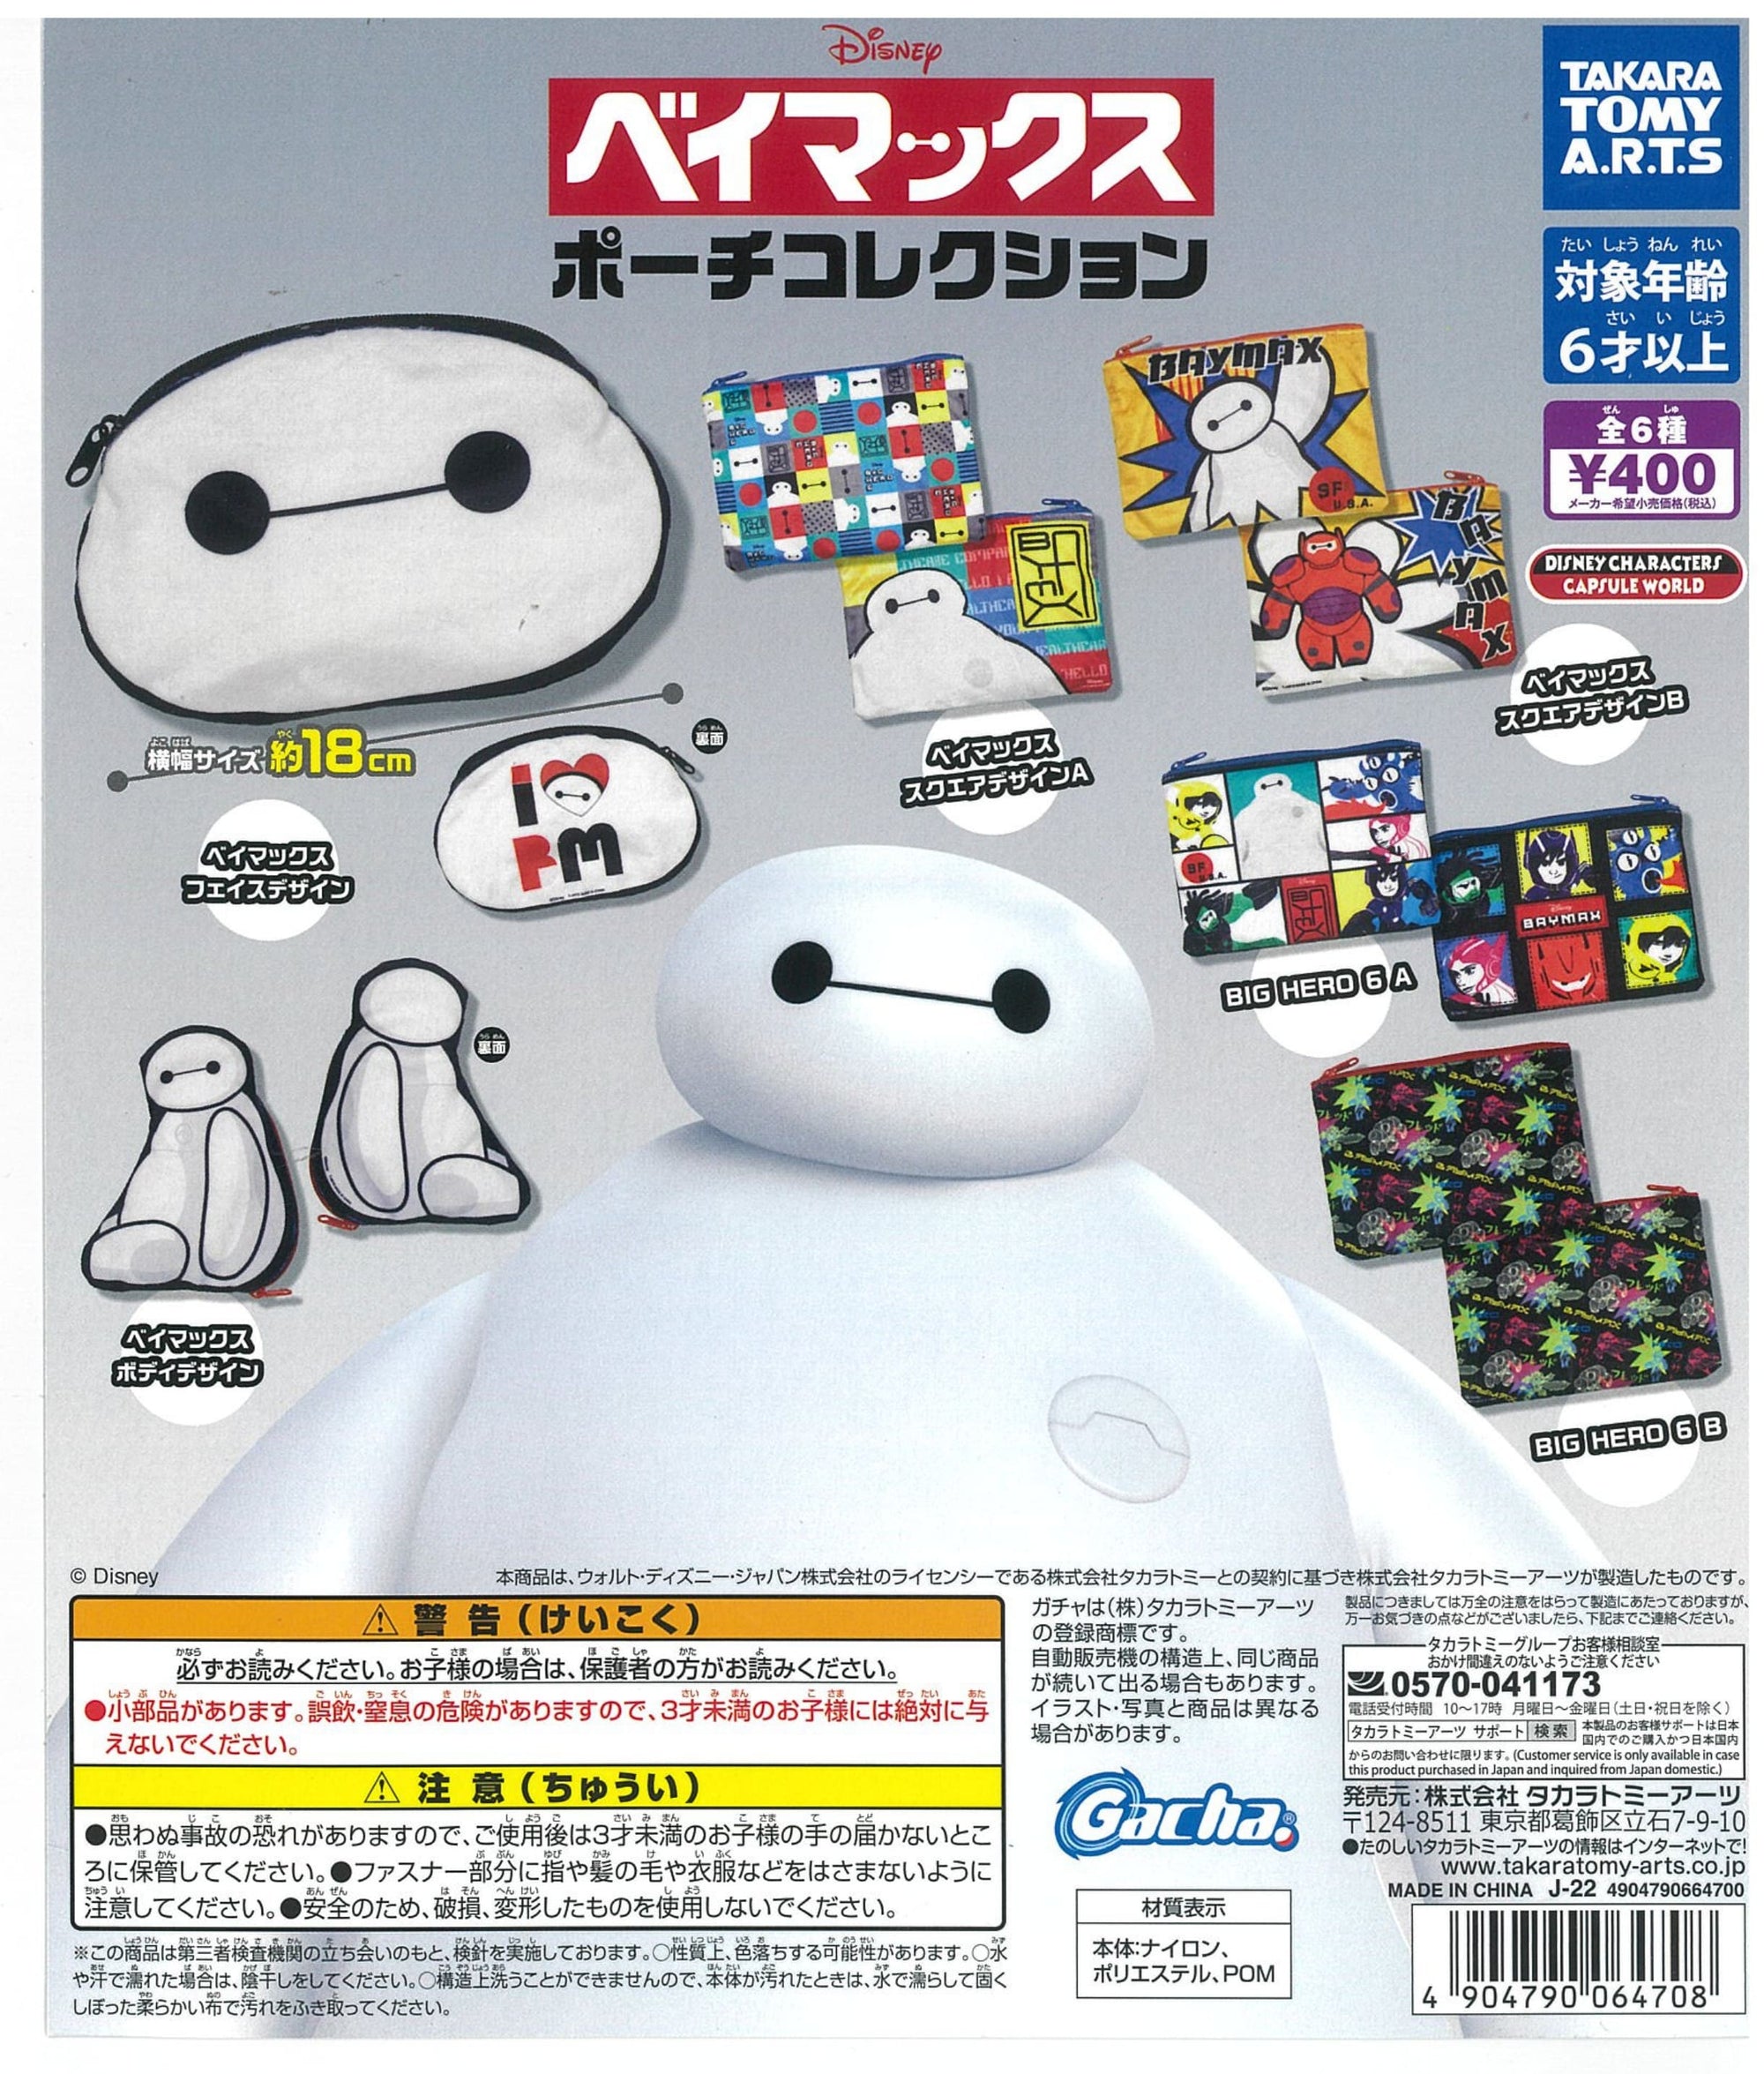 Takara Tomy A.R.T.S CP2131 Big Hero 6 Baymax Pouch Collection